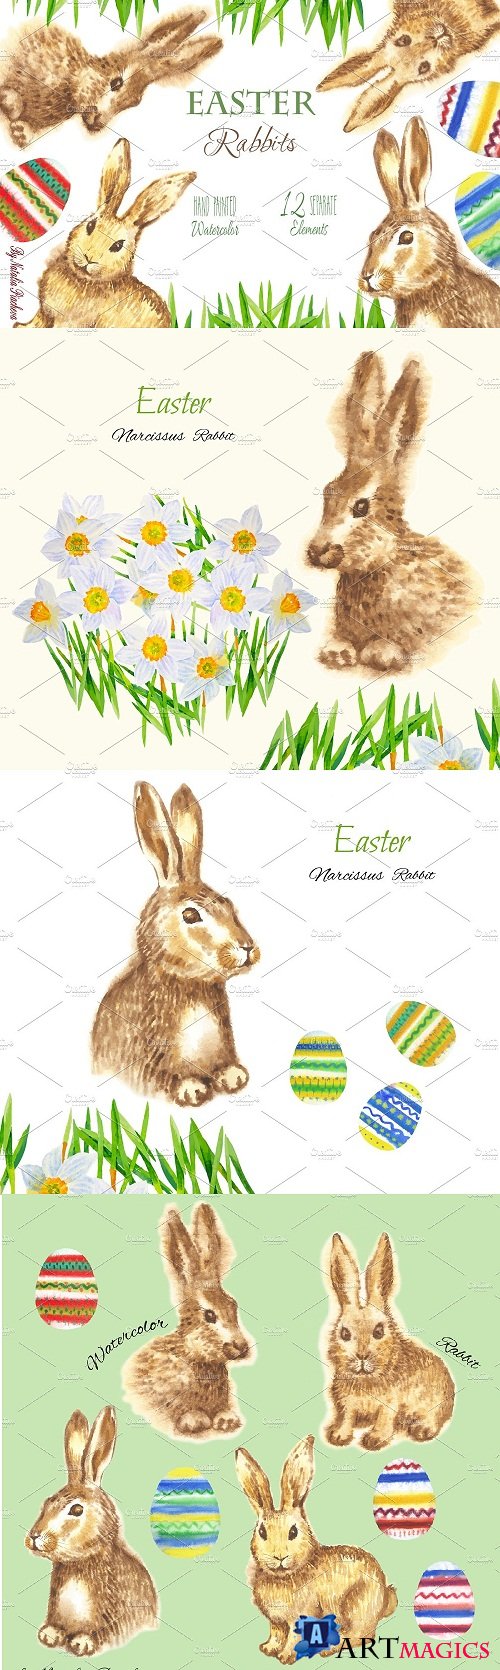 Clipart with Easter Rabbits - 507961